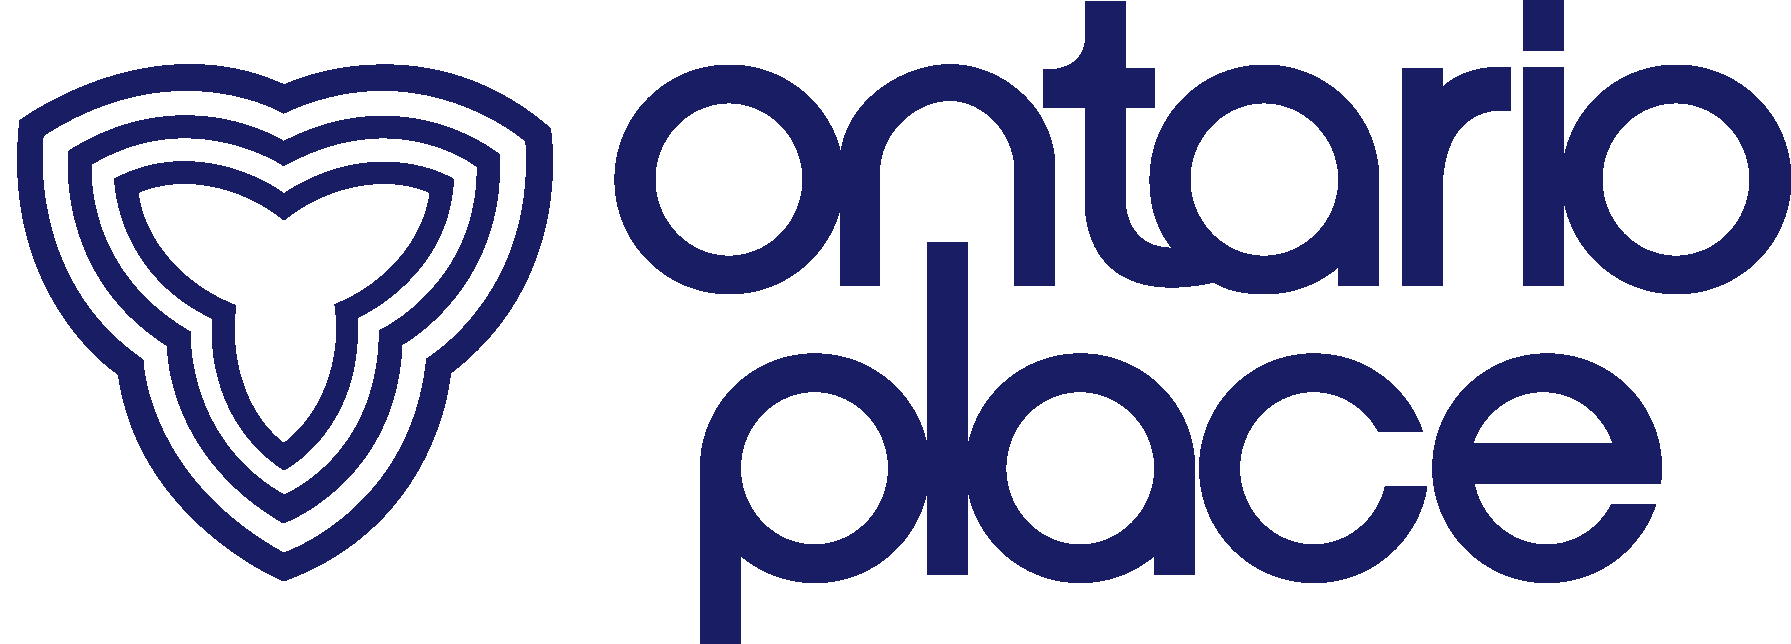 Ontaio Pplace_Stacked_CMYK_Trillium_2018logo.png